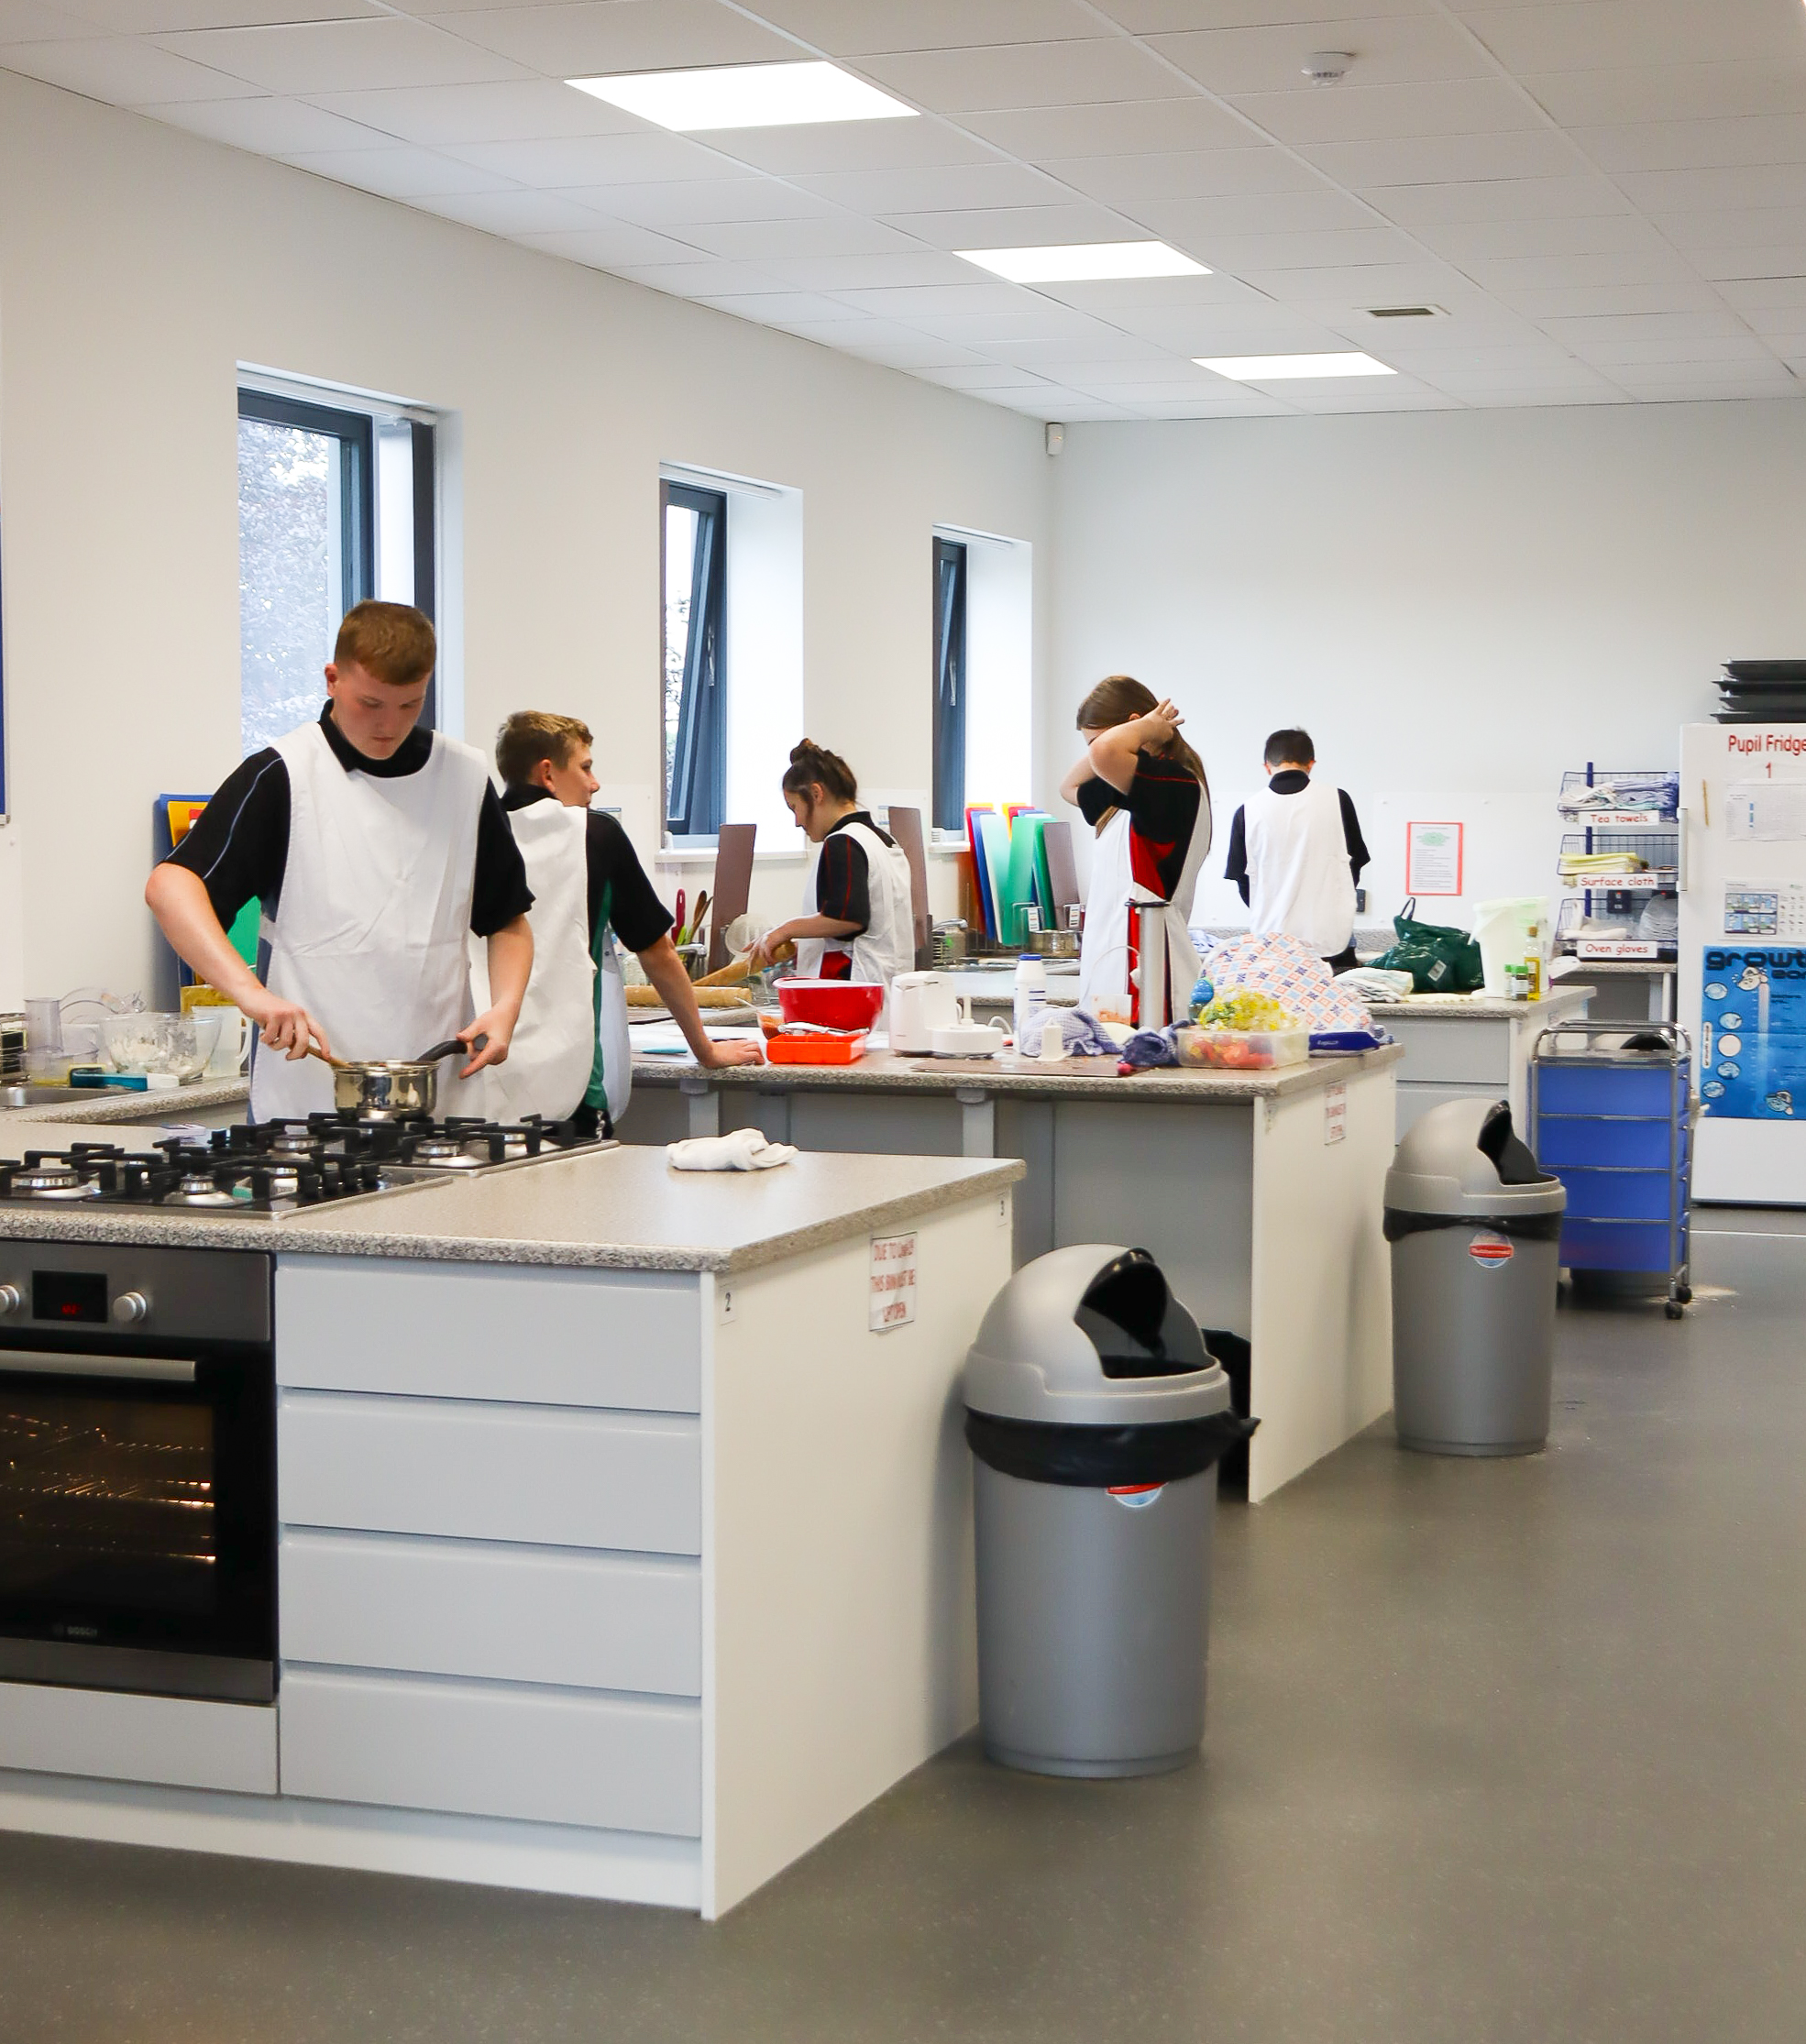 Pupils cooking in a Food Tech classroom